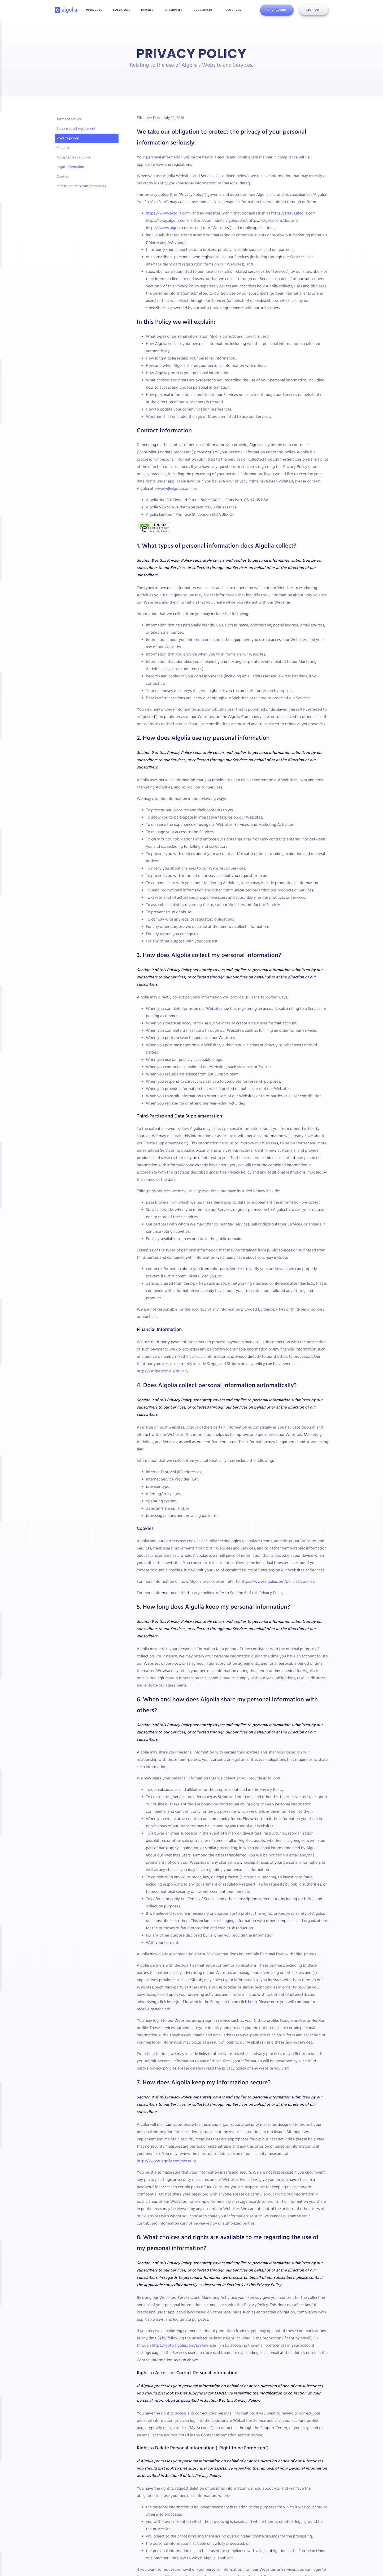 Screenshot of the Privacy Policy page from the Algolia website.